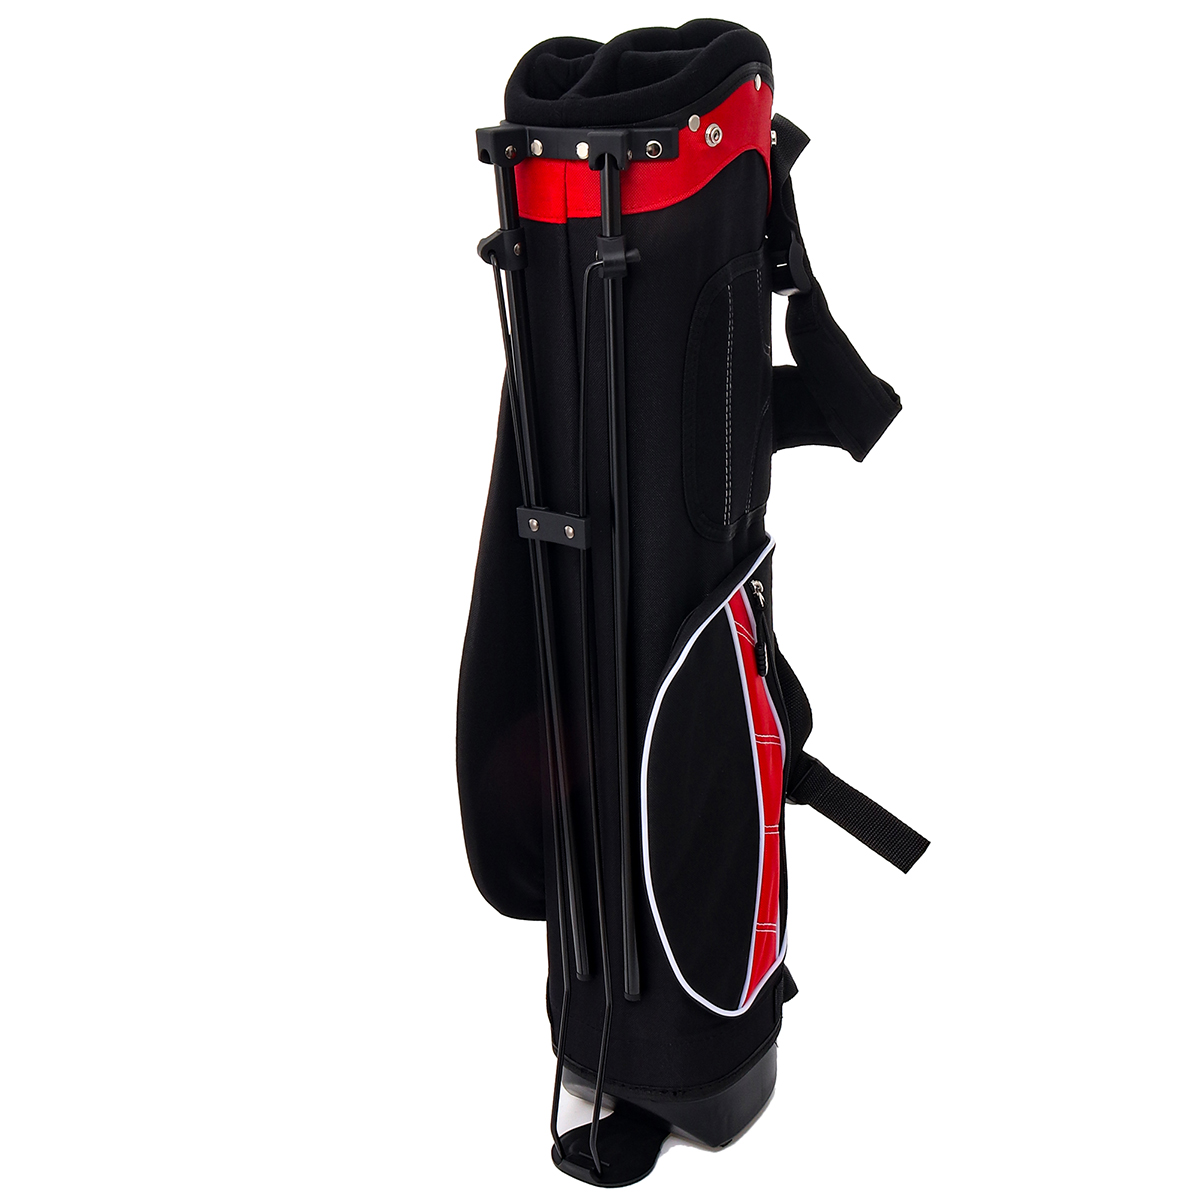 Childrens-Golf-Bag-Golf-Support-Ultra-Light-Stand-Portable-Large-Capacity-Double-Shoulder-Strap-For--1810143-6